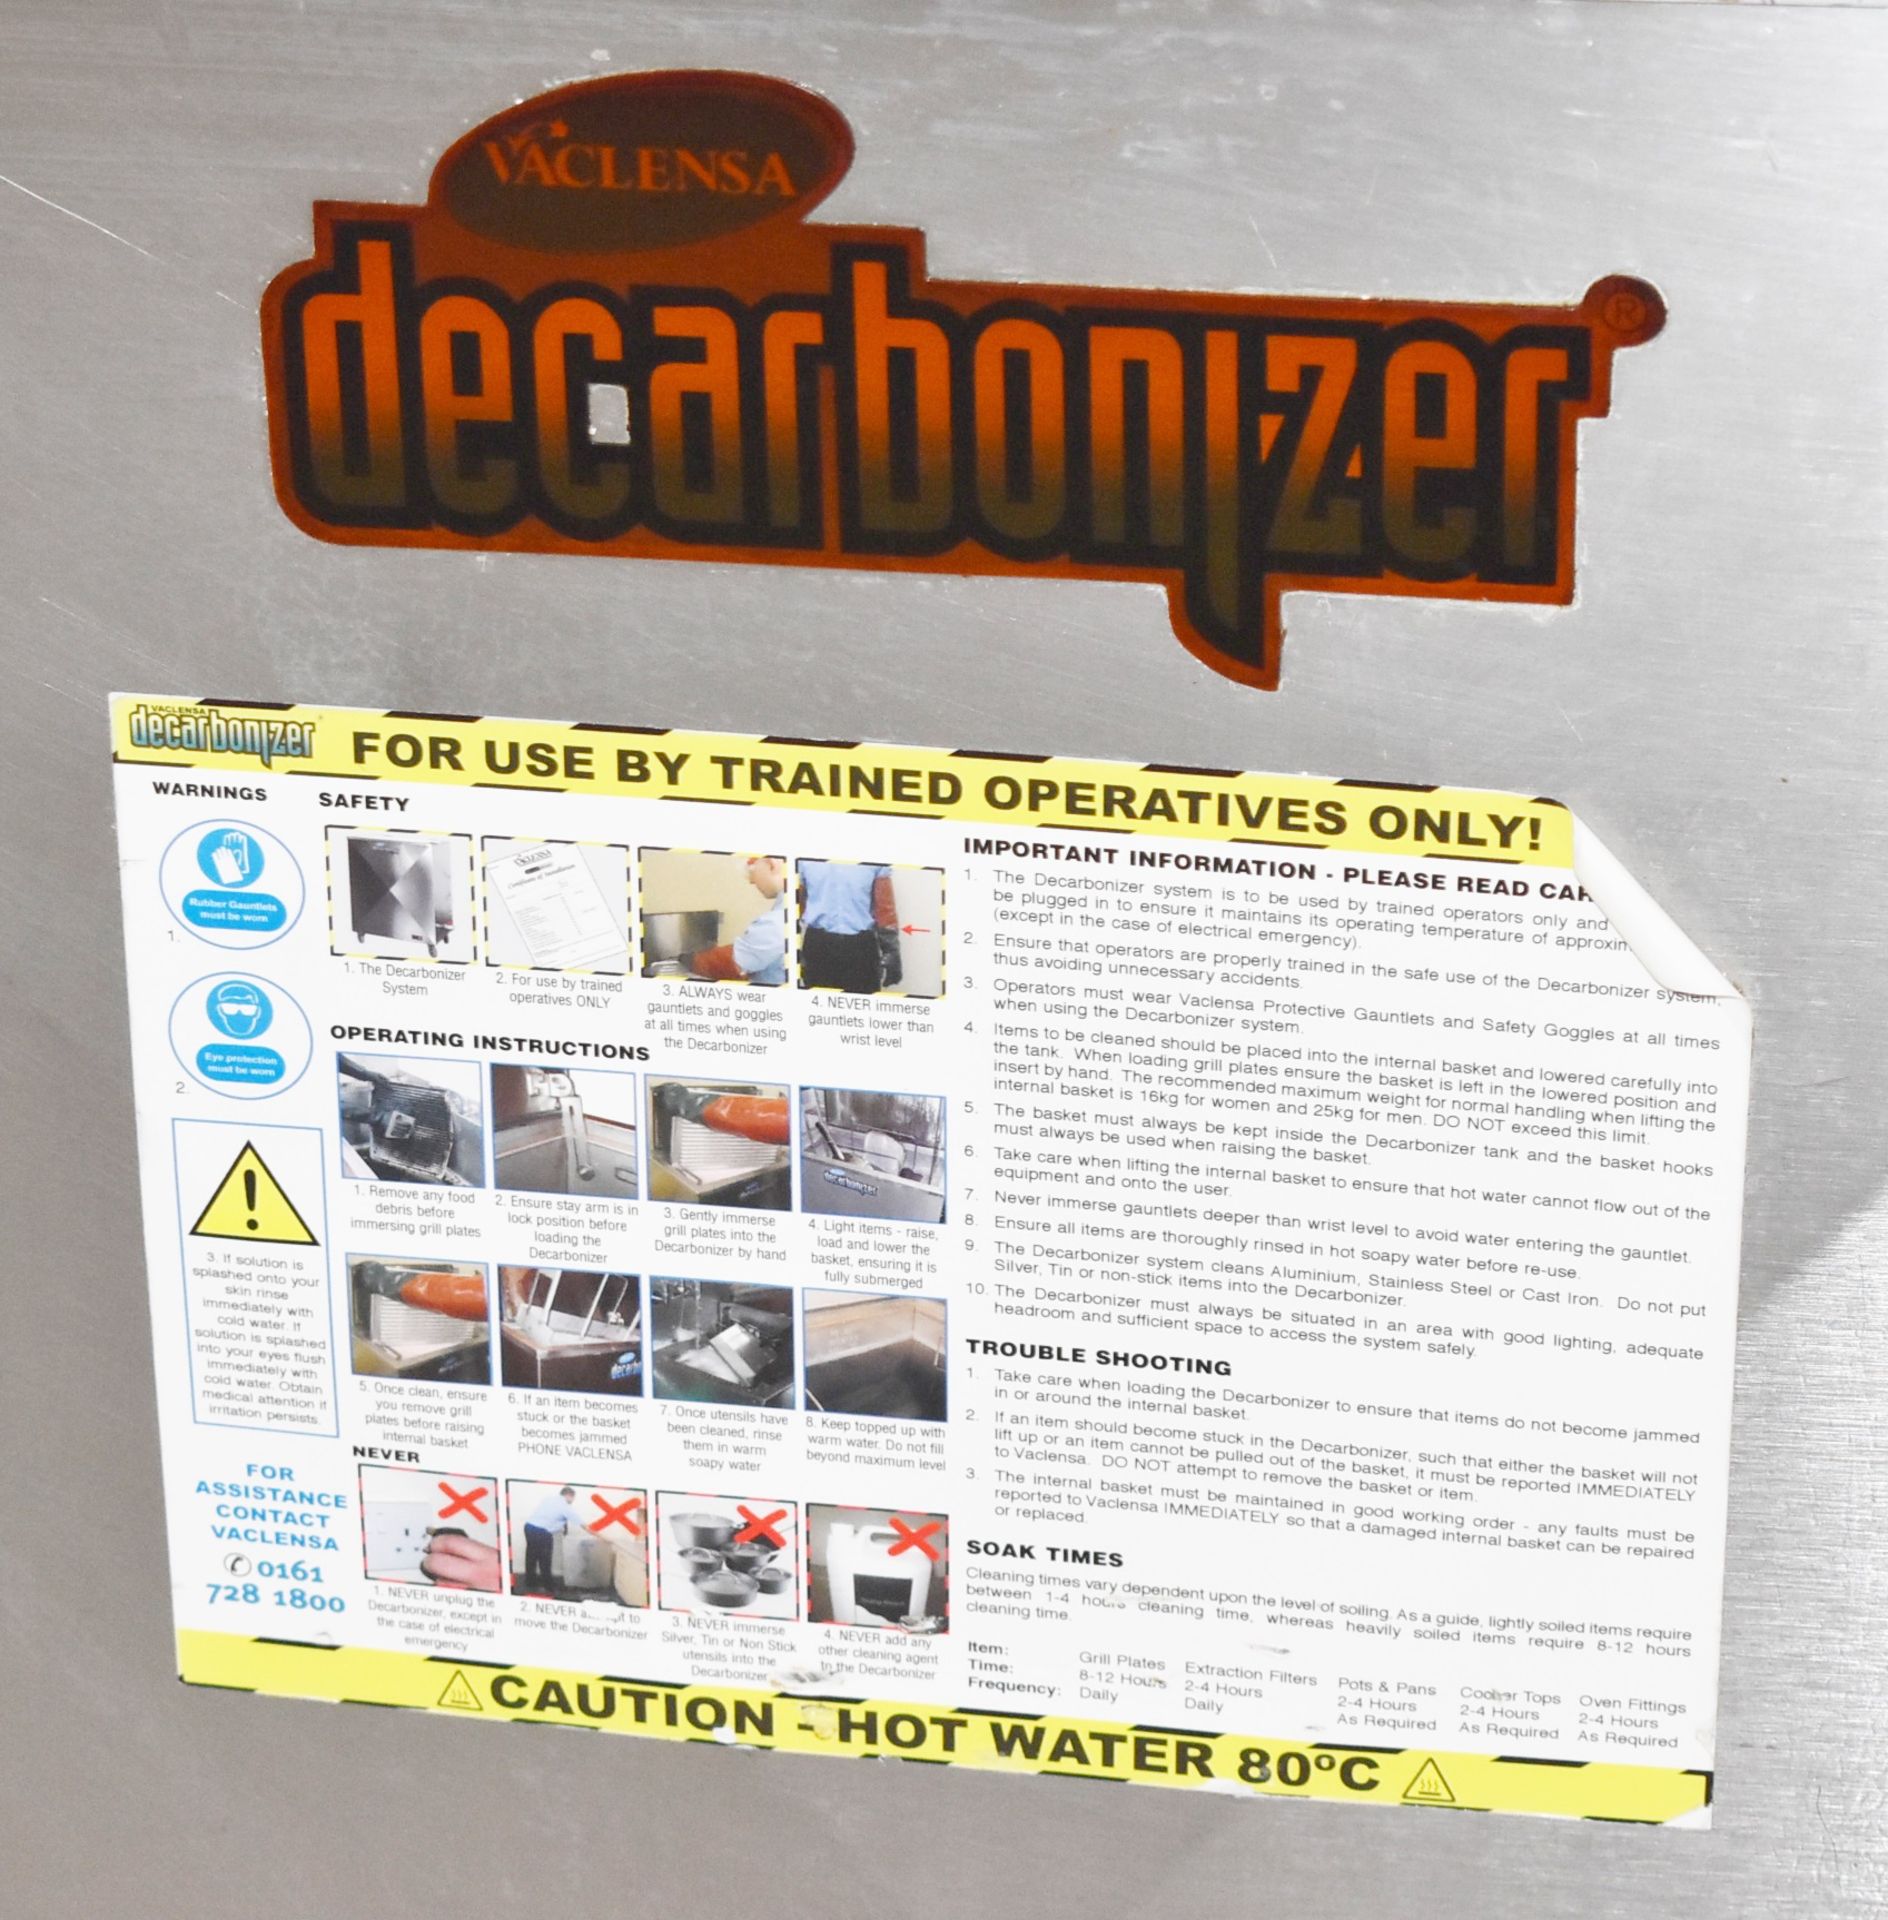 1 x Vaclensa Decarbonizer - Powerful Cleaning System Designed to Effectively Clean a Wide Range of - Bild 3 aus 10